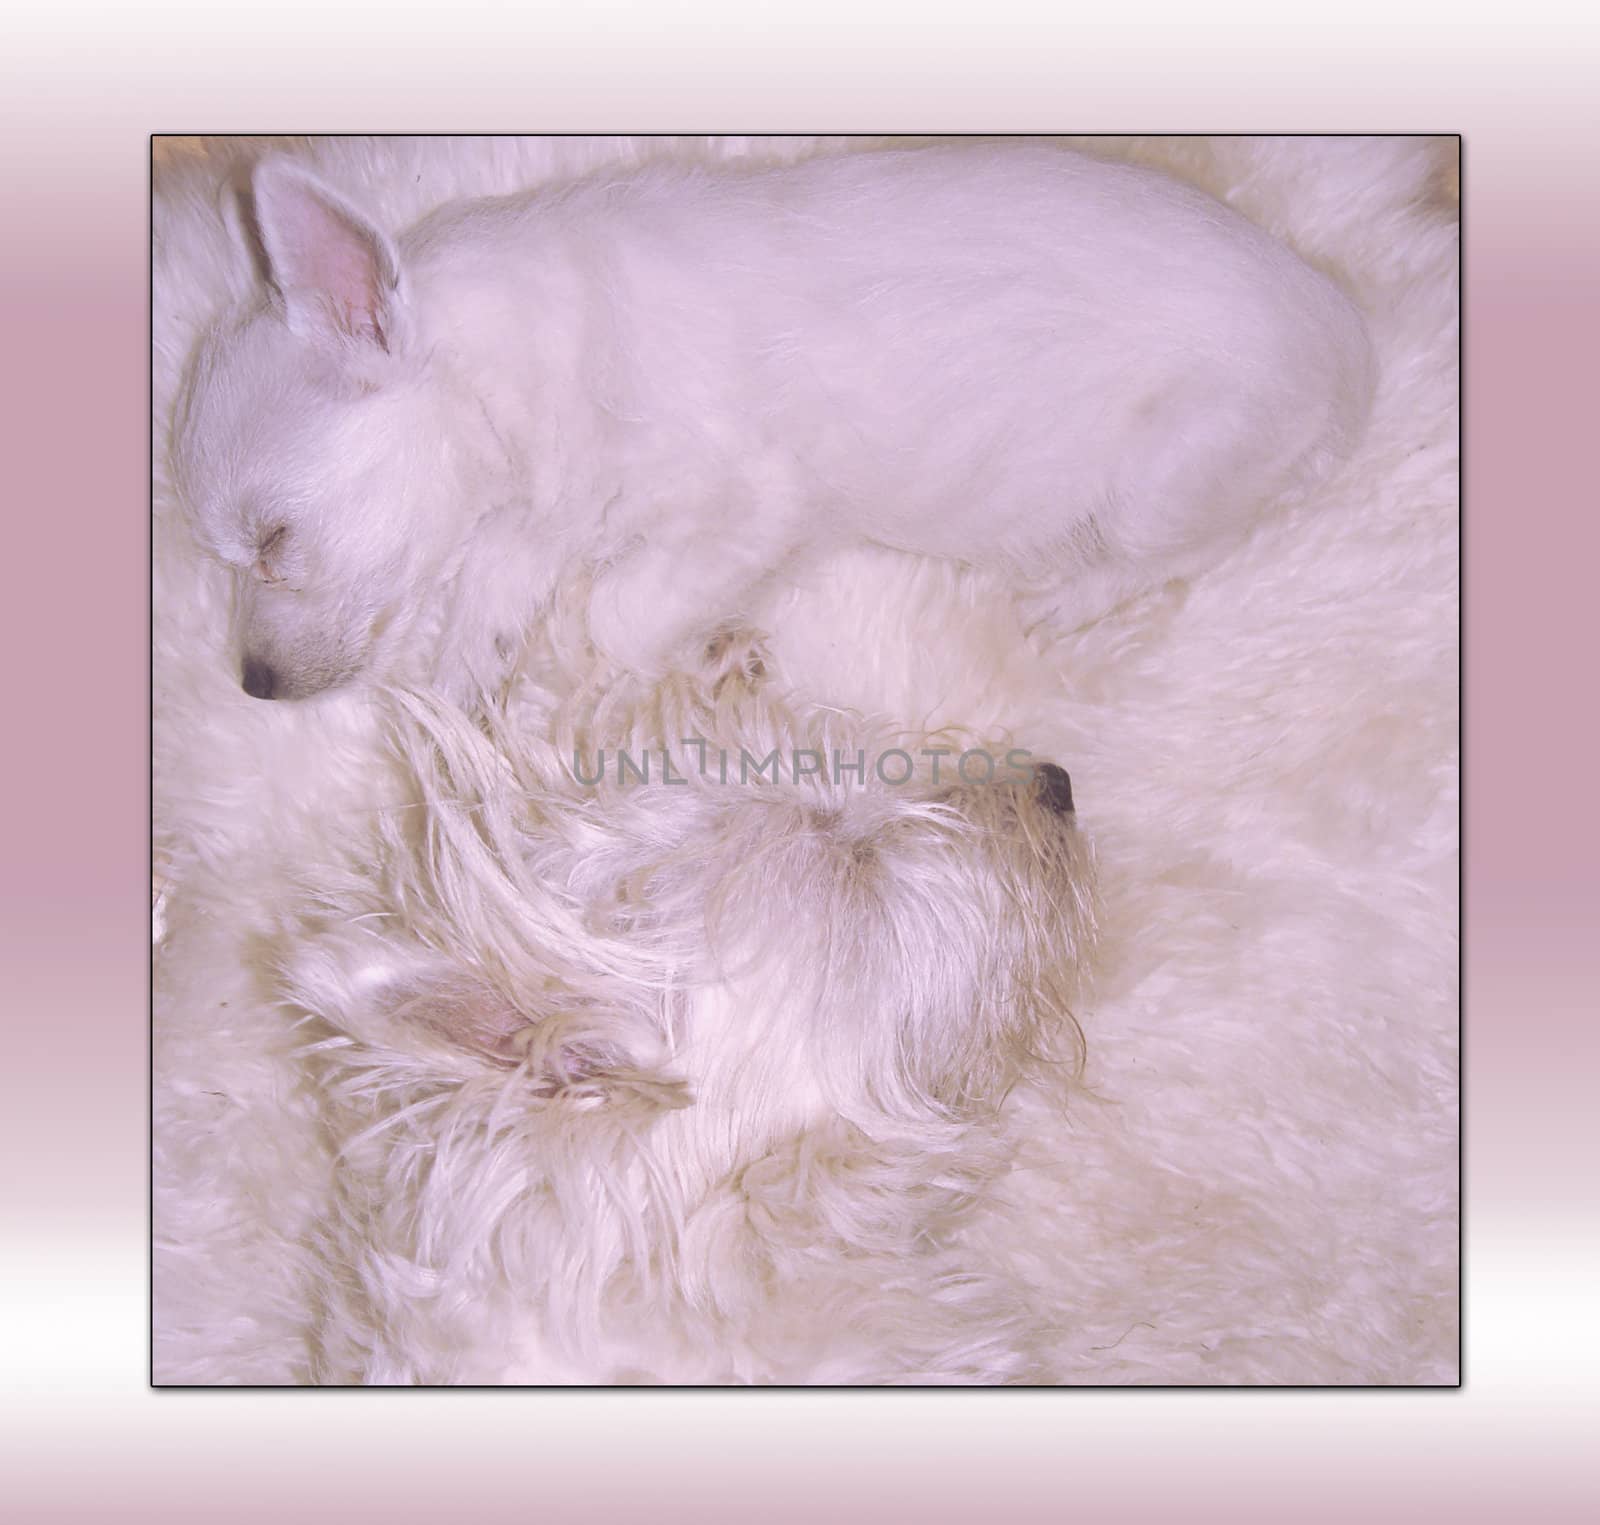 Two white dogs sleeping